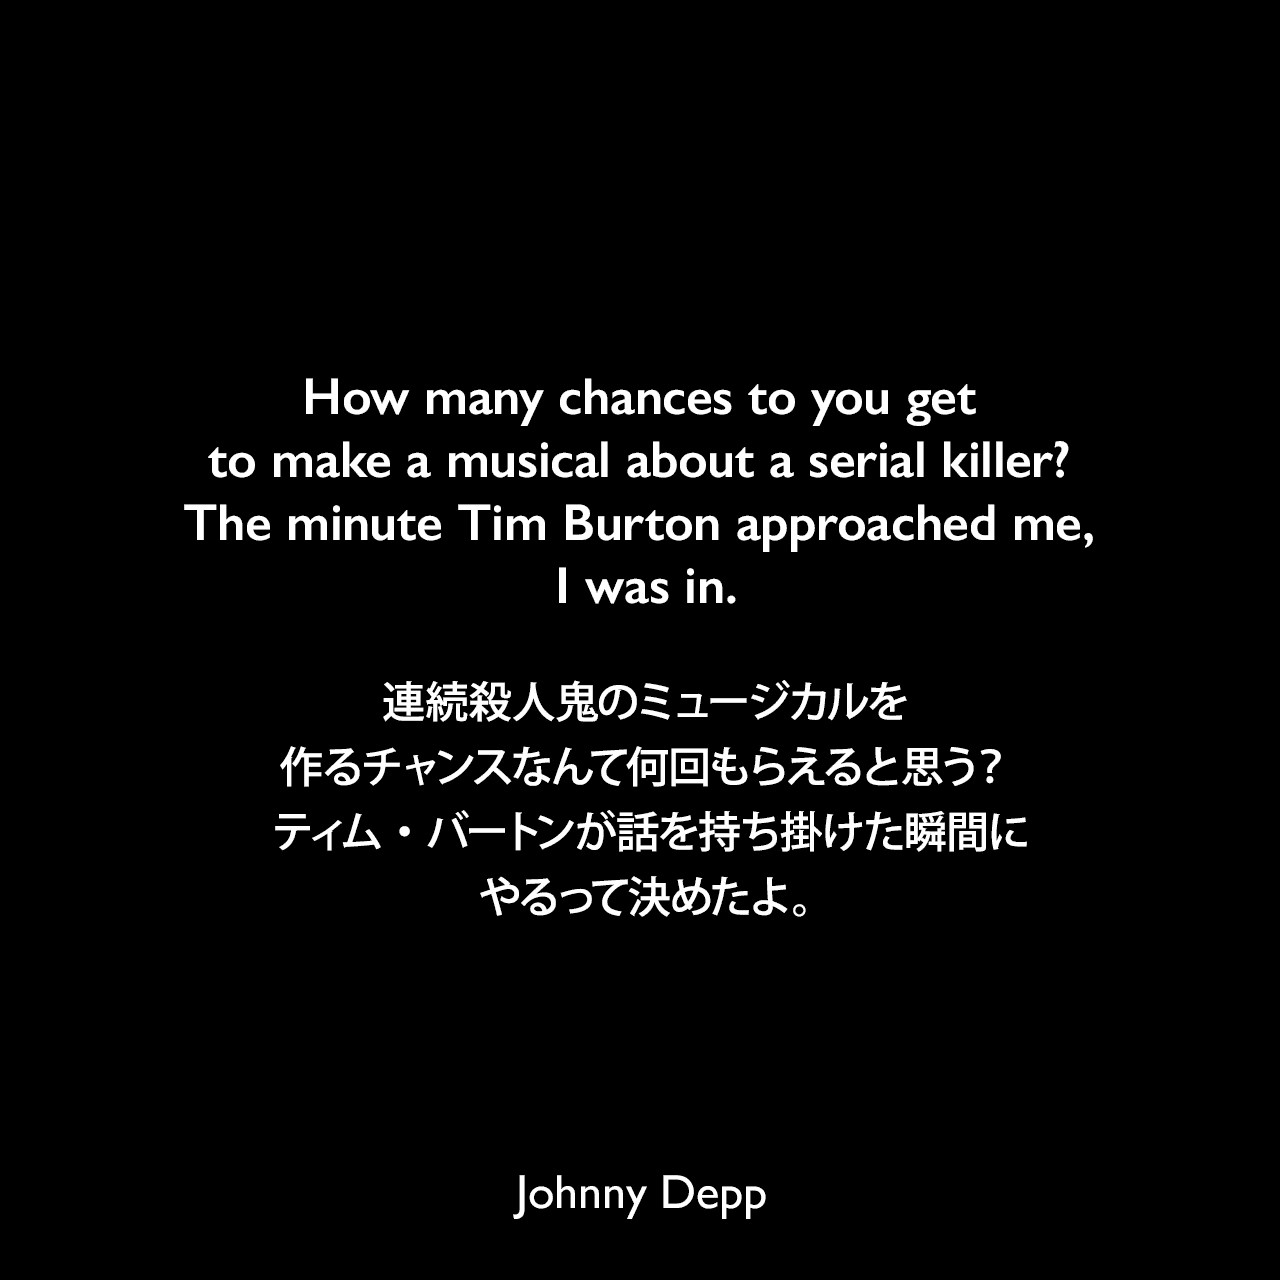 How many chances to you get to make a musical about a serial killer? The minute Tim Burton approached me, I was in.連続殺人鬼のミュージカルを作るチャンスなんて何回もらえると思う？ ティム・バートンが話を持ち掛けた瞬間にやるって決めたよ。Johnny Depp